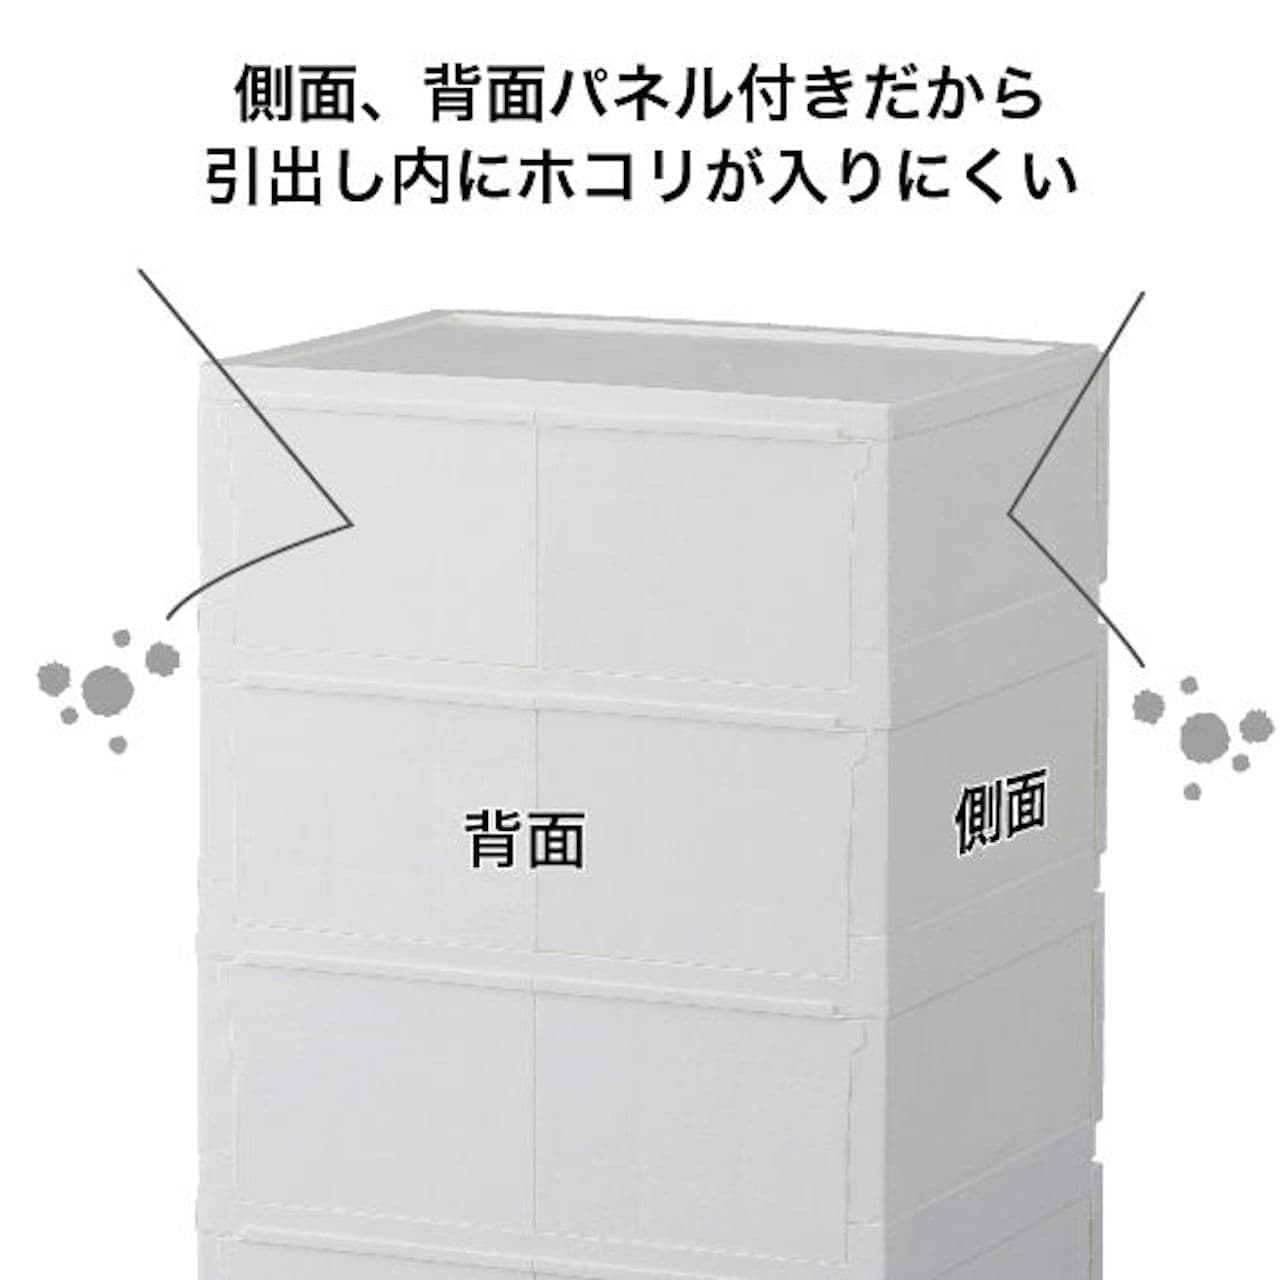 Nitori Storage Products "Easy-to-Assemble Wide Chest with Wall PC Decony without Tools" New